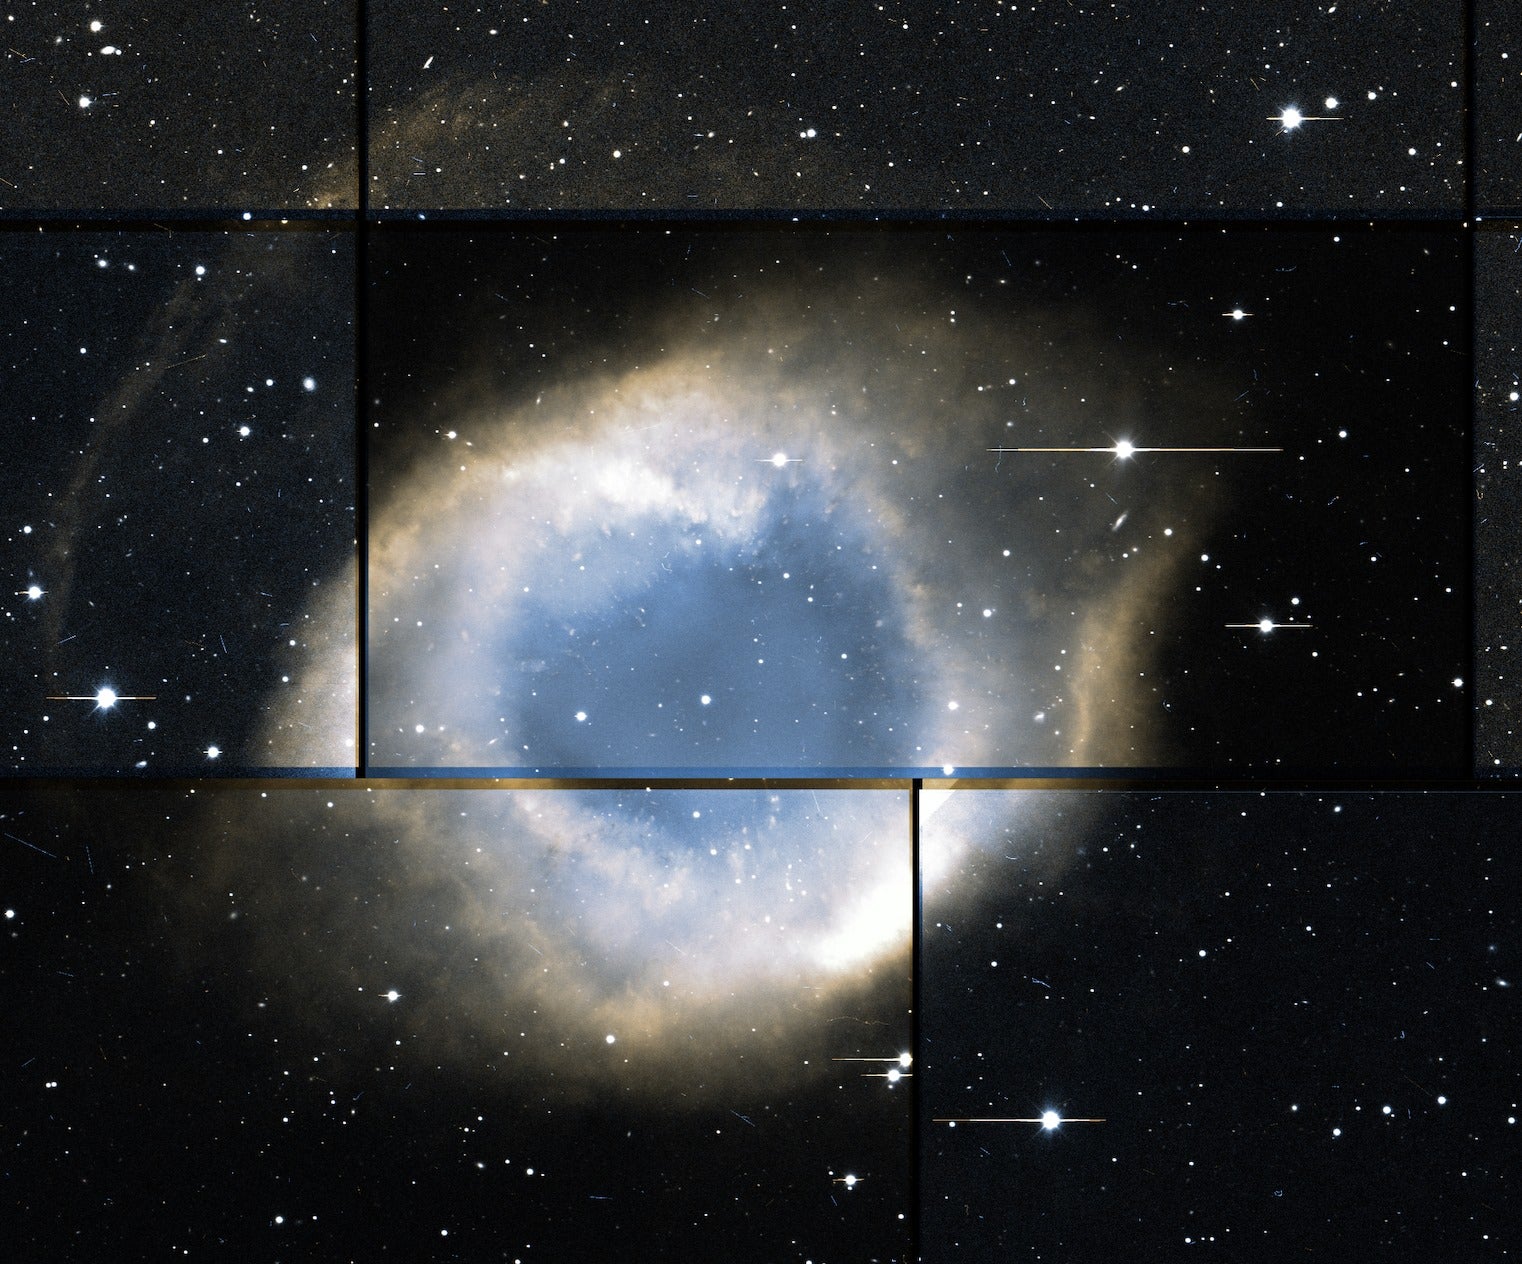 The Helix Nebula, as seen by several CCDs. (Image: Rob Morgan, Dark Energy Survey)